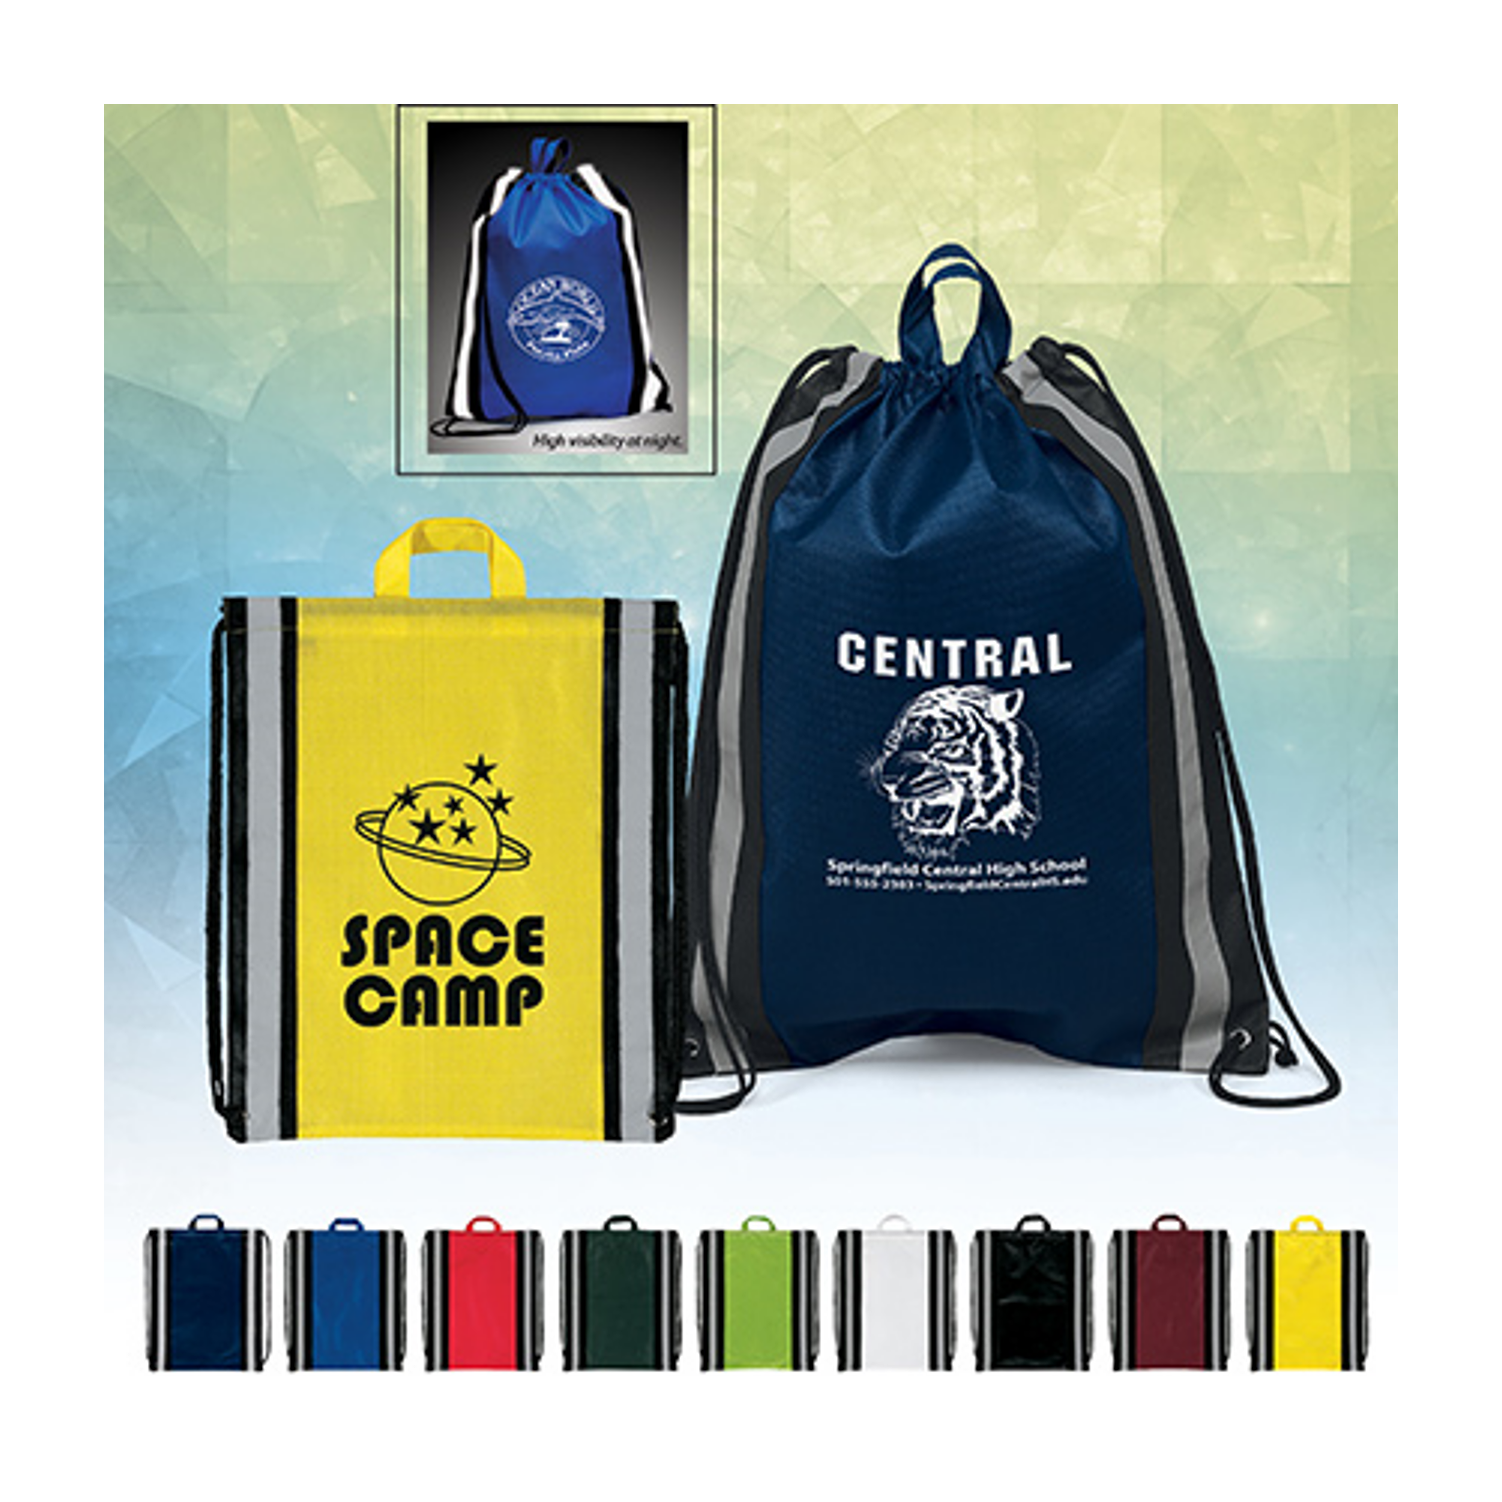 Recycled Promotional Products America Recycles Day Recycled Personalized Drawstring Bags Eco Bags